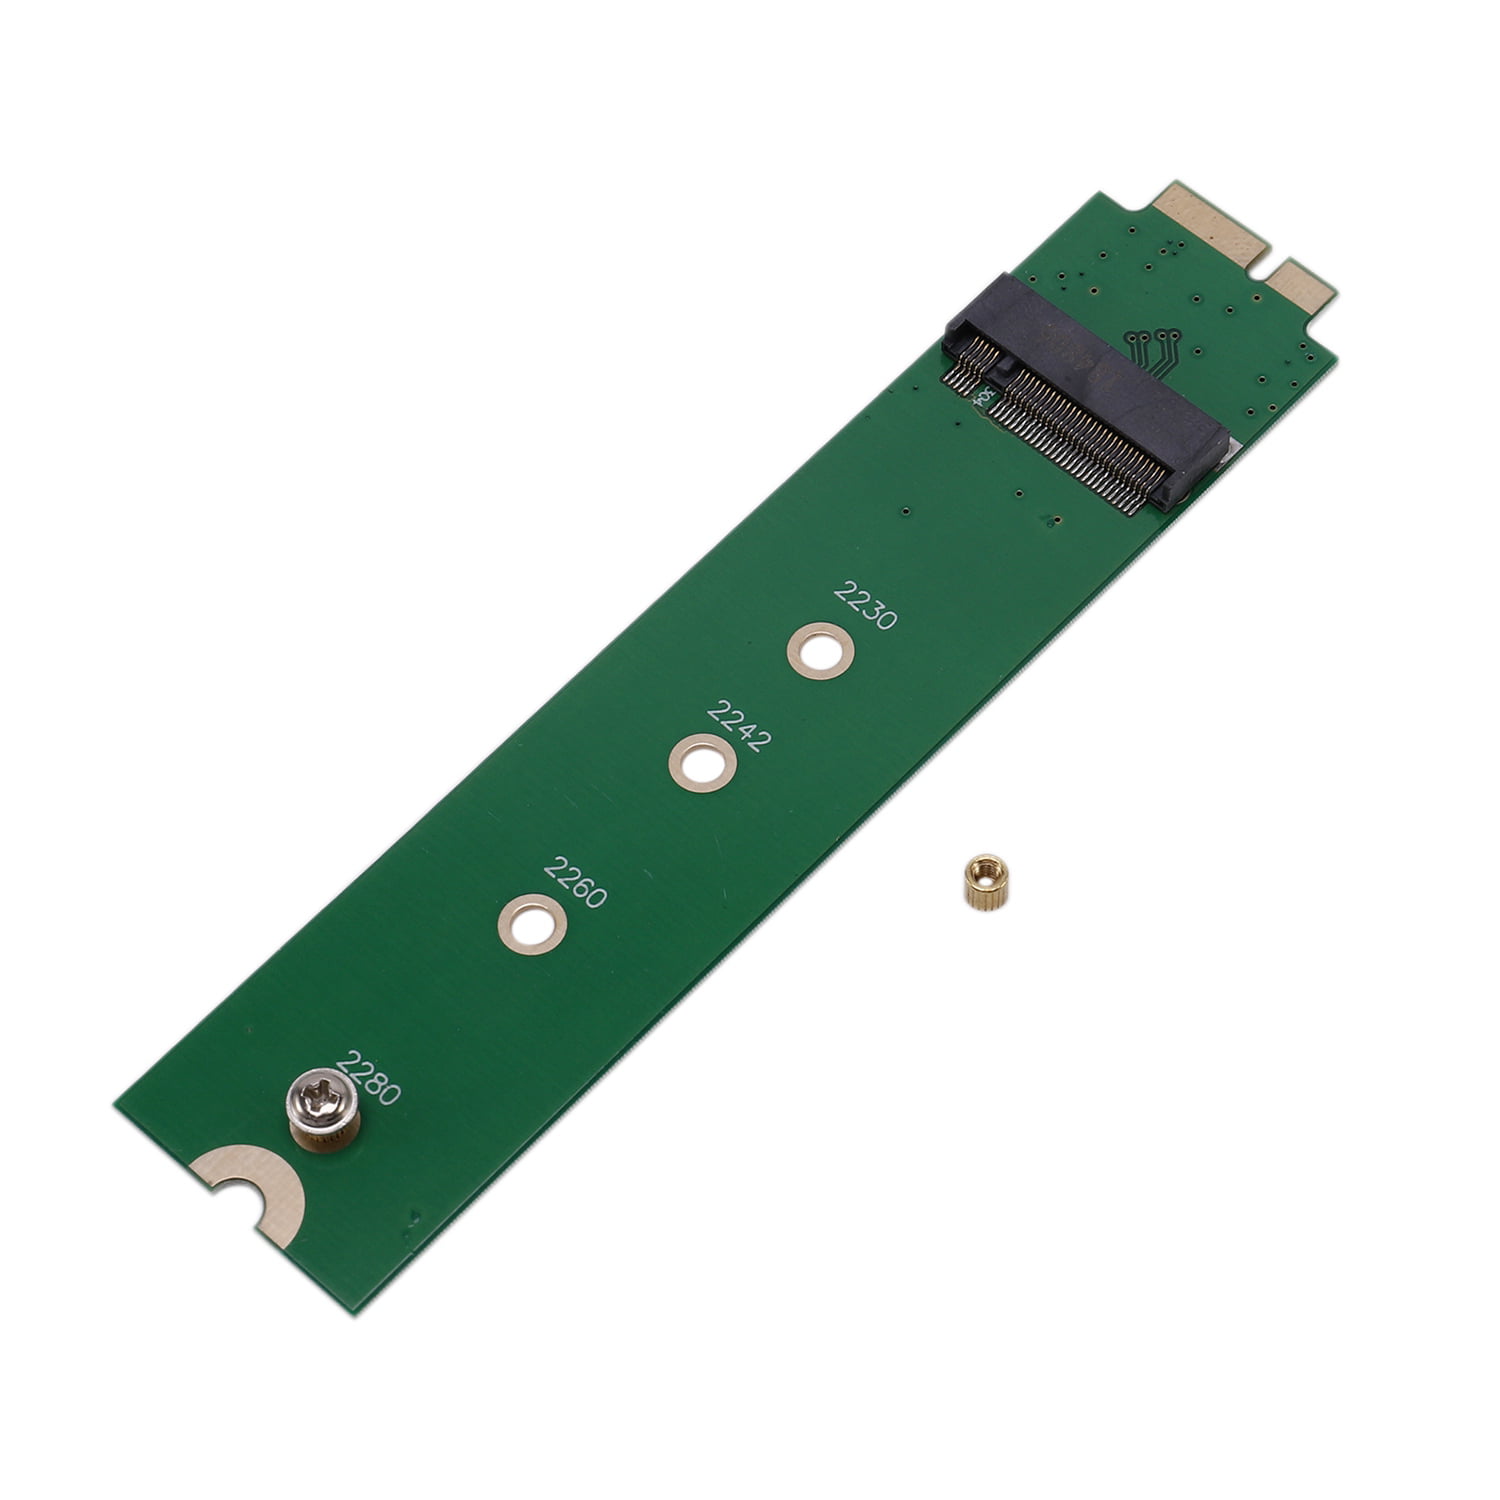 M.2 NGFF SSD to A1369 A1370 Adapter for MacBook Air 2010 2011 HDD Replacement